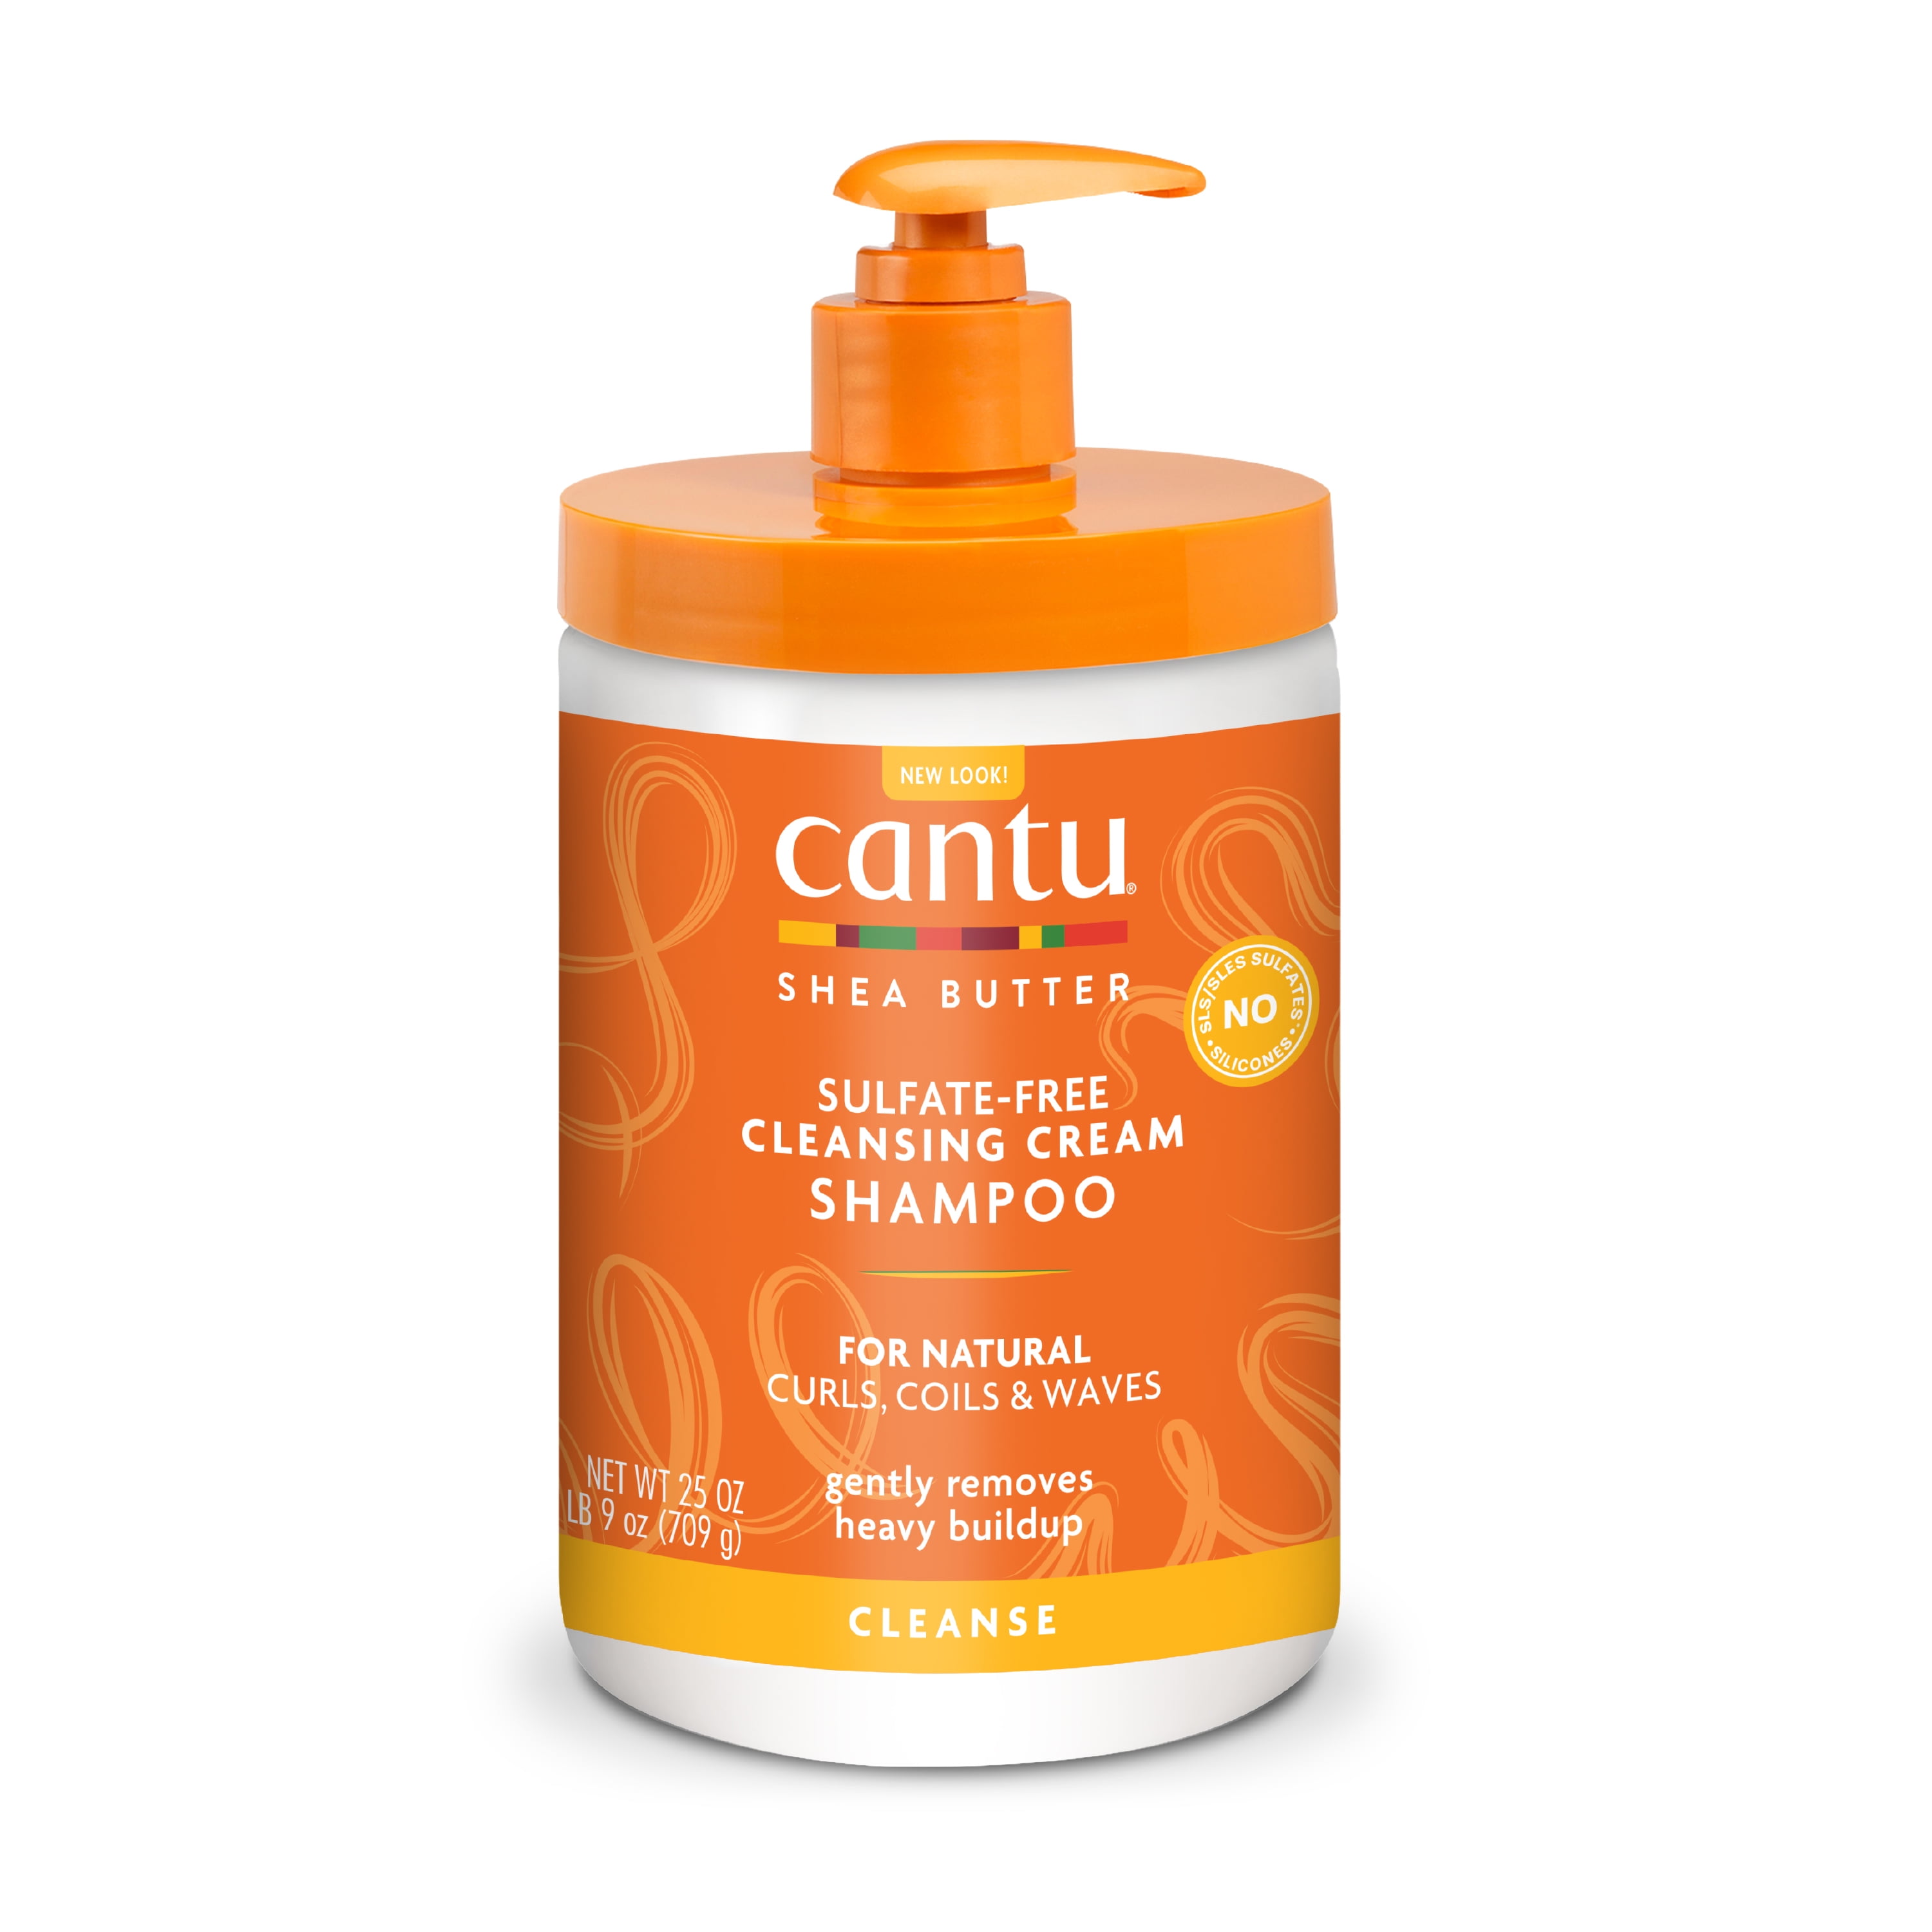 Cantu Cleansing Cream Shampoo for Natural Hair, Sulfate-Free with Shea Butter, 25 fl oz.